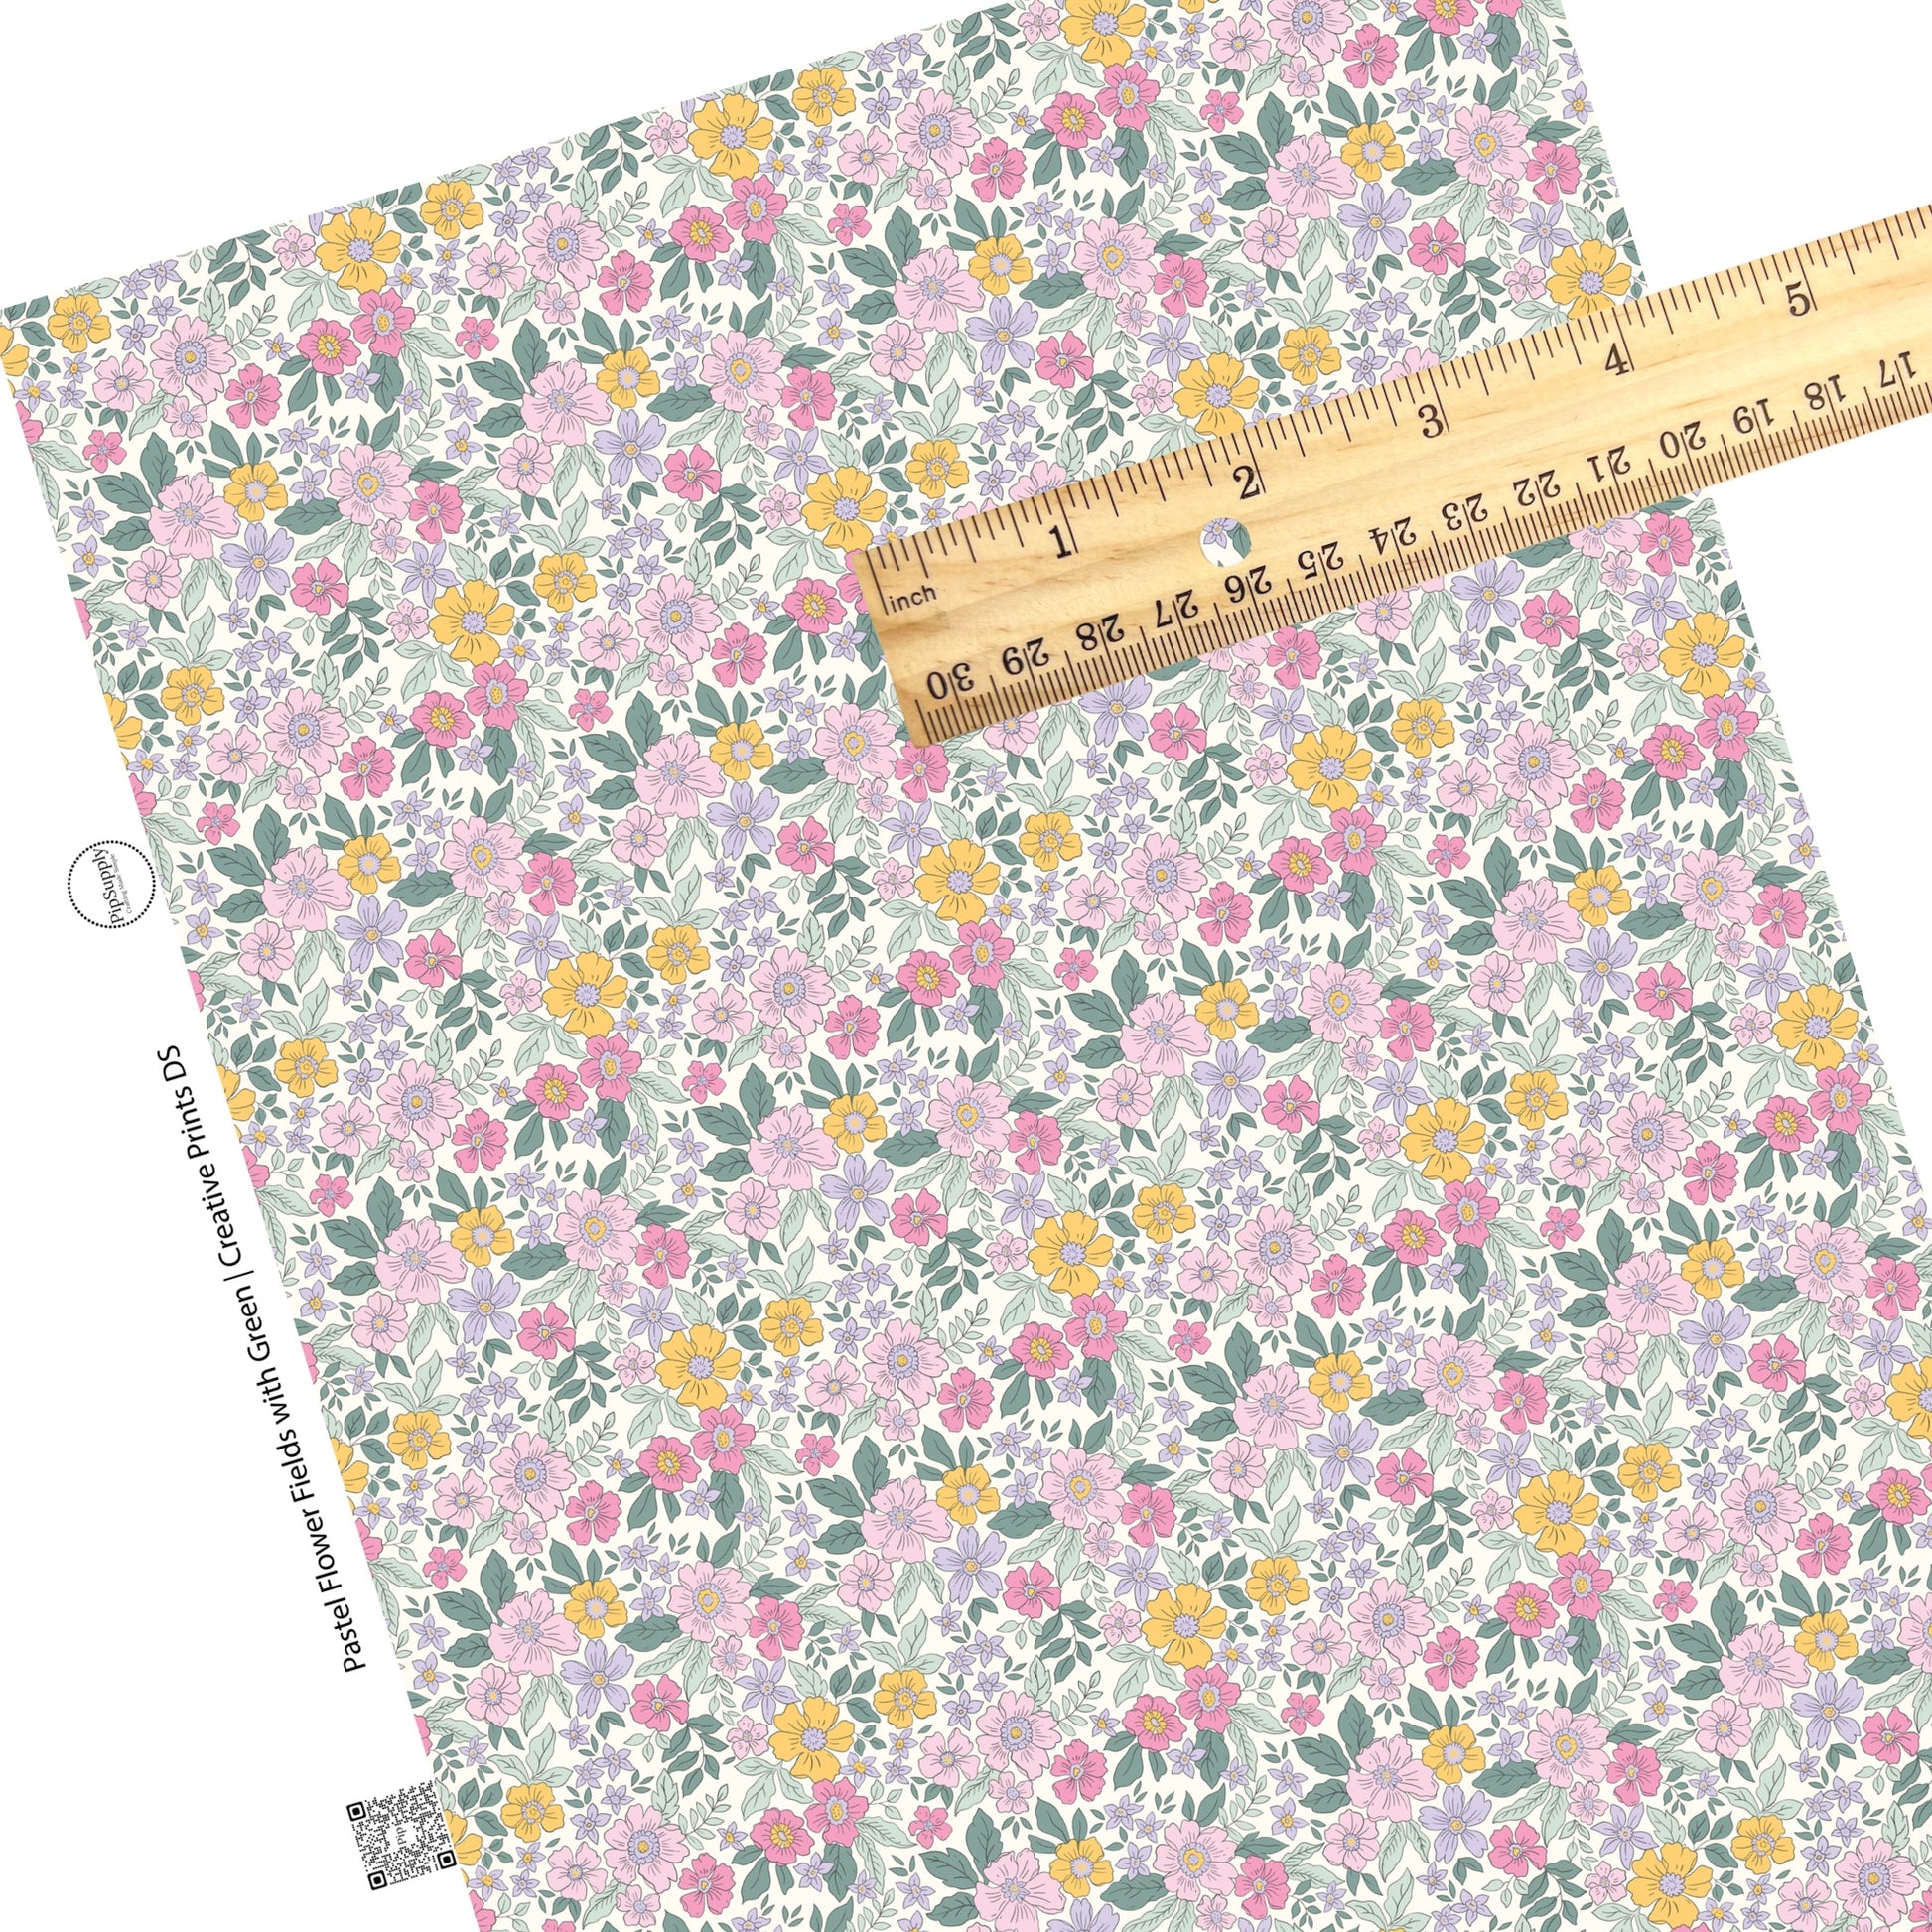 Green leaves on yellow, pink, and lilac flowers on white faux leather sheet